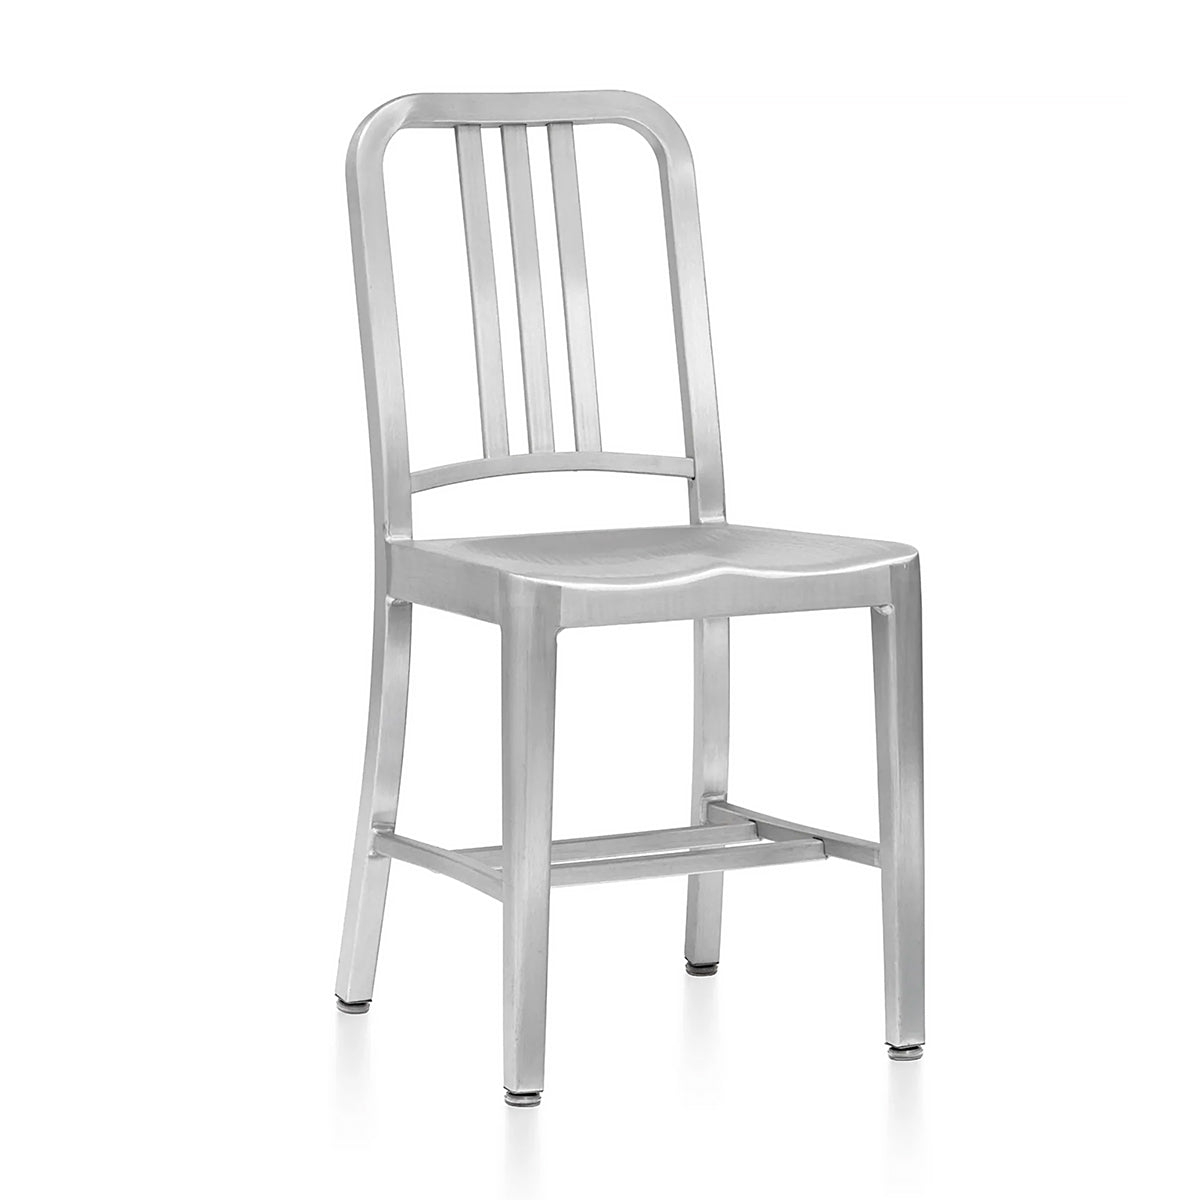 EMECO NAVY CHAIR エメコ ネイビーチェア – THE CHAIR SHOP